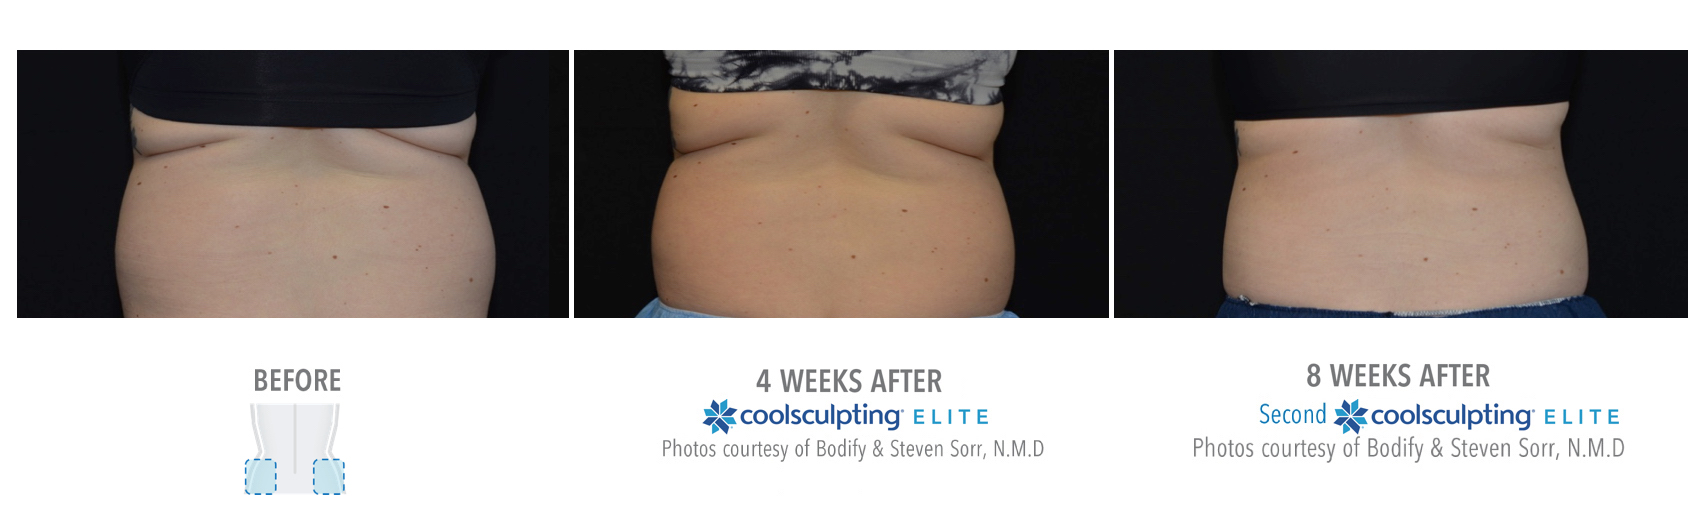 Coolsculpting Treatment Results on a Female Love Handles | Melindas Medical Spa & Salon in North Myrtle Beach, SC